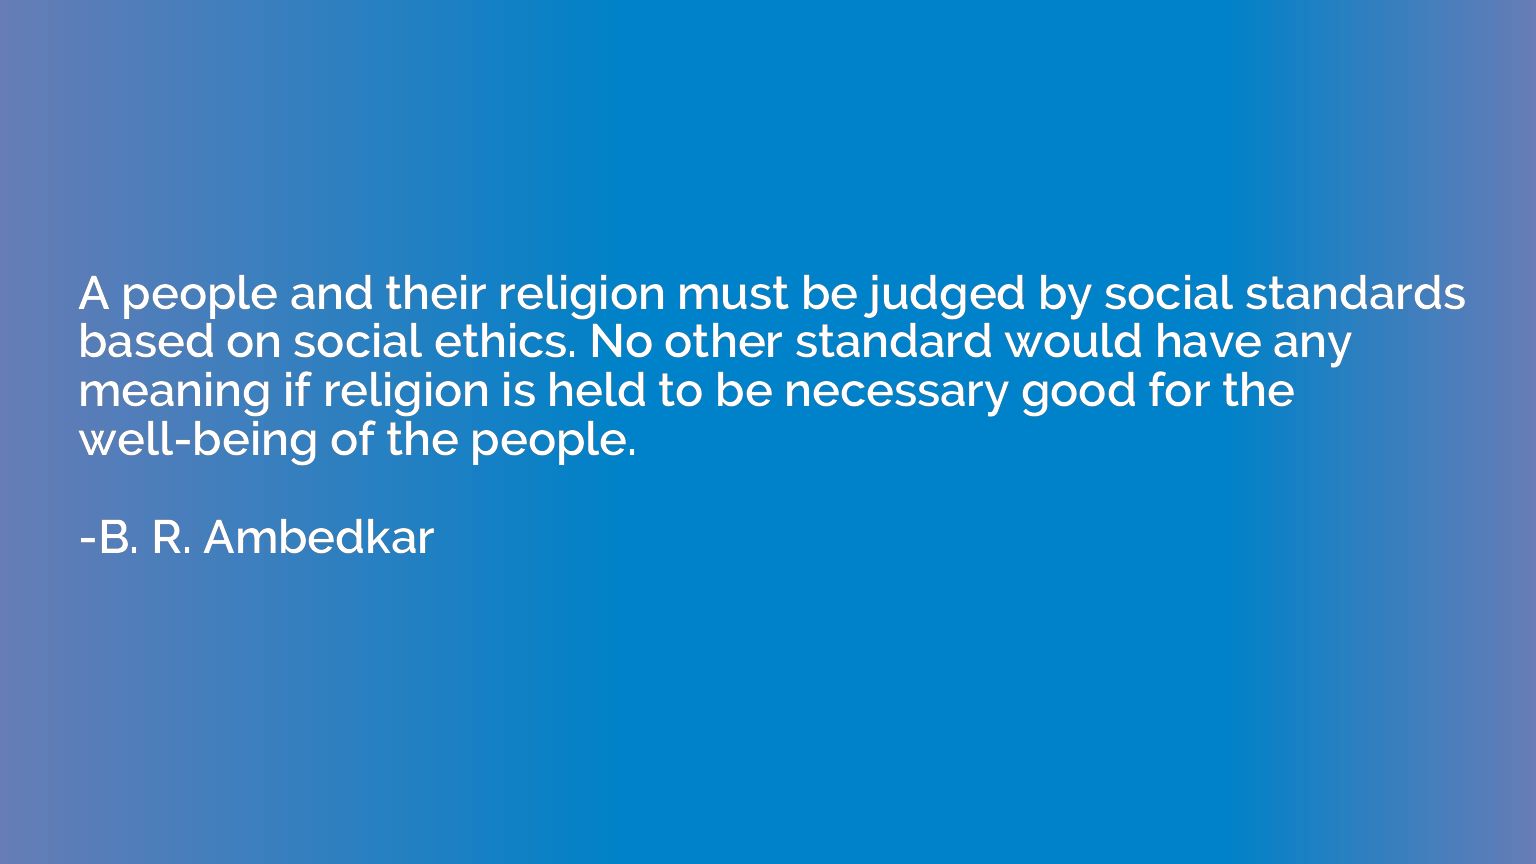 A people and their religion must be judged by social standar